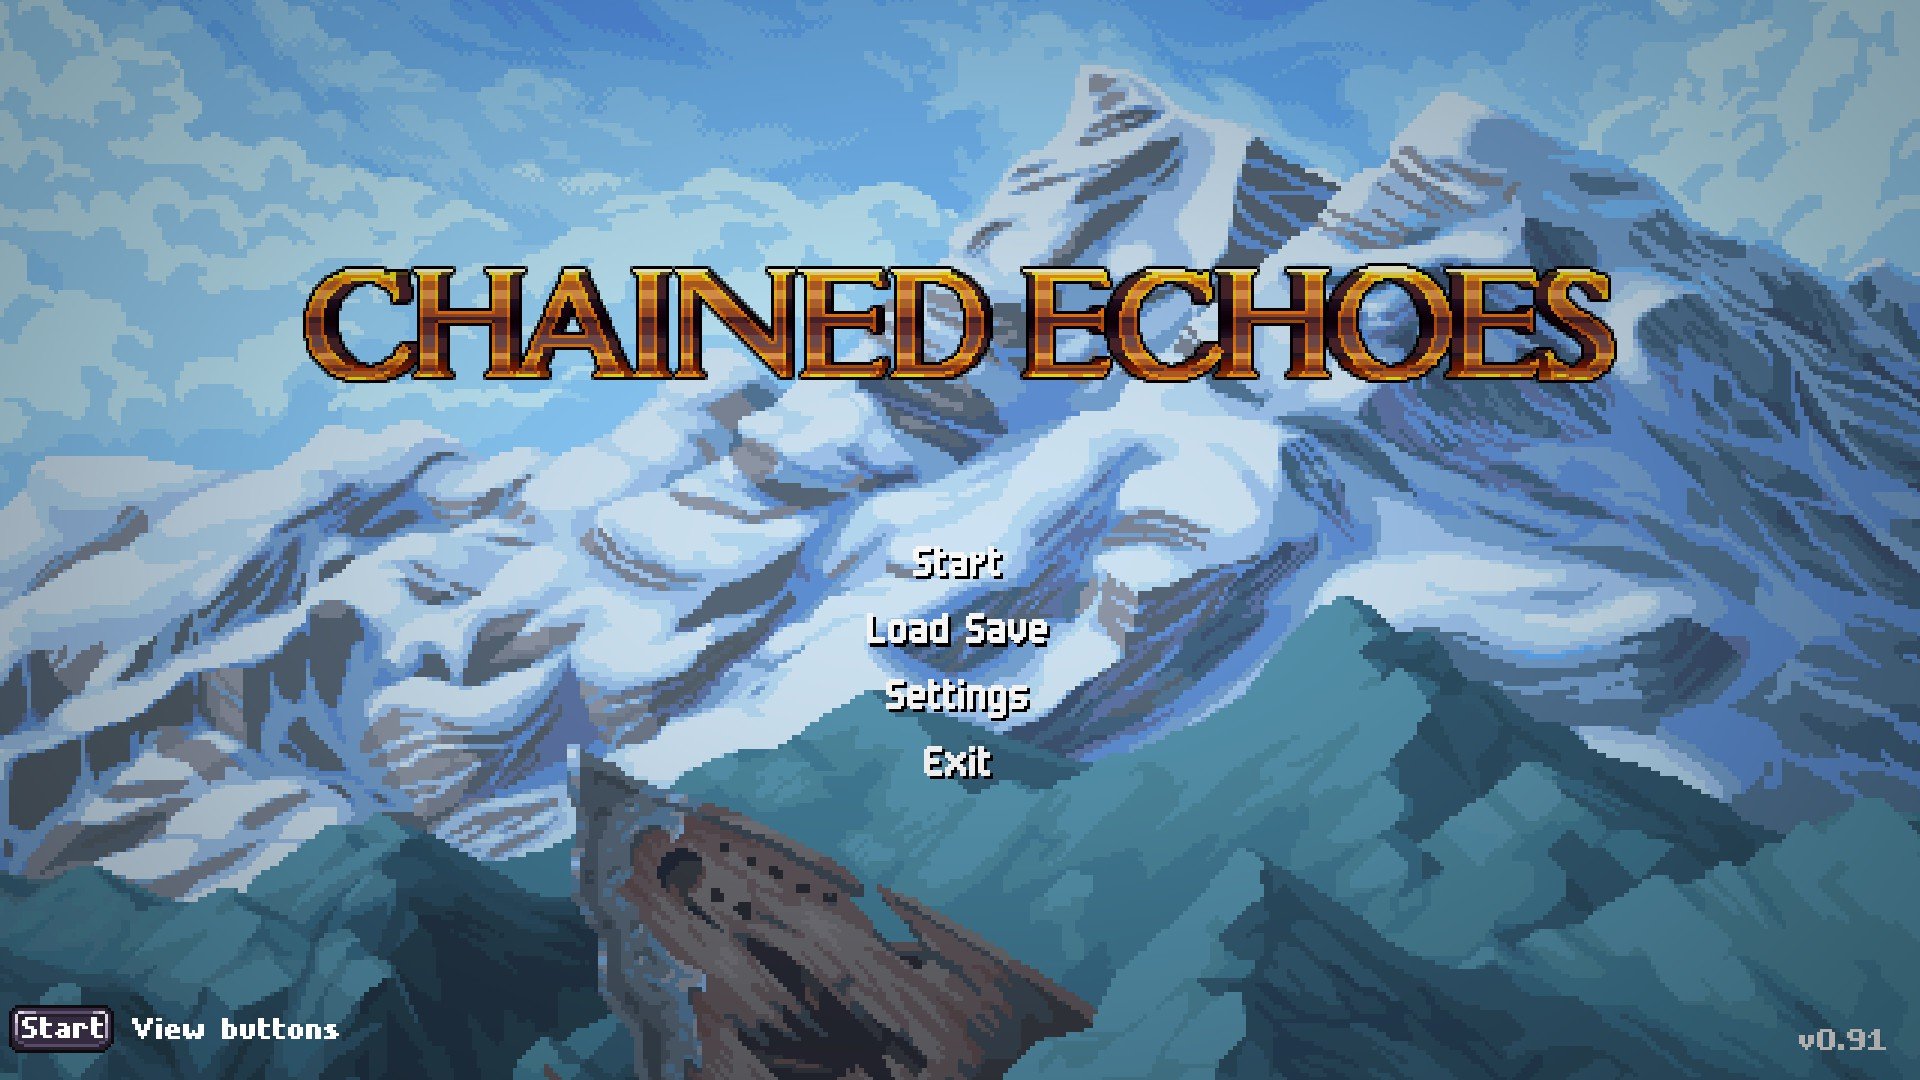 JRPG Chained Echoes coming Day One to Game Pass on December 8th - XboxEra